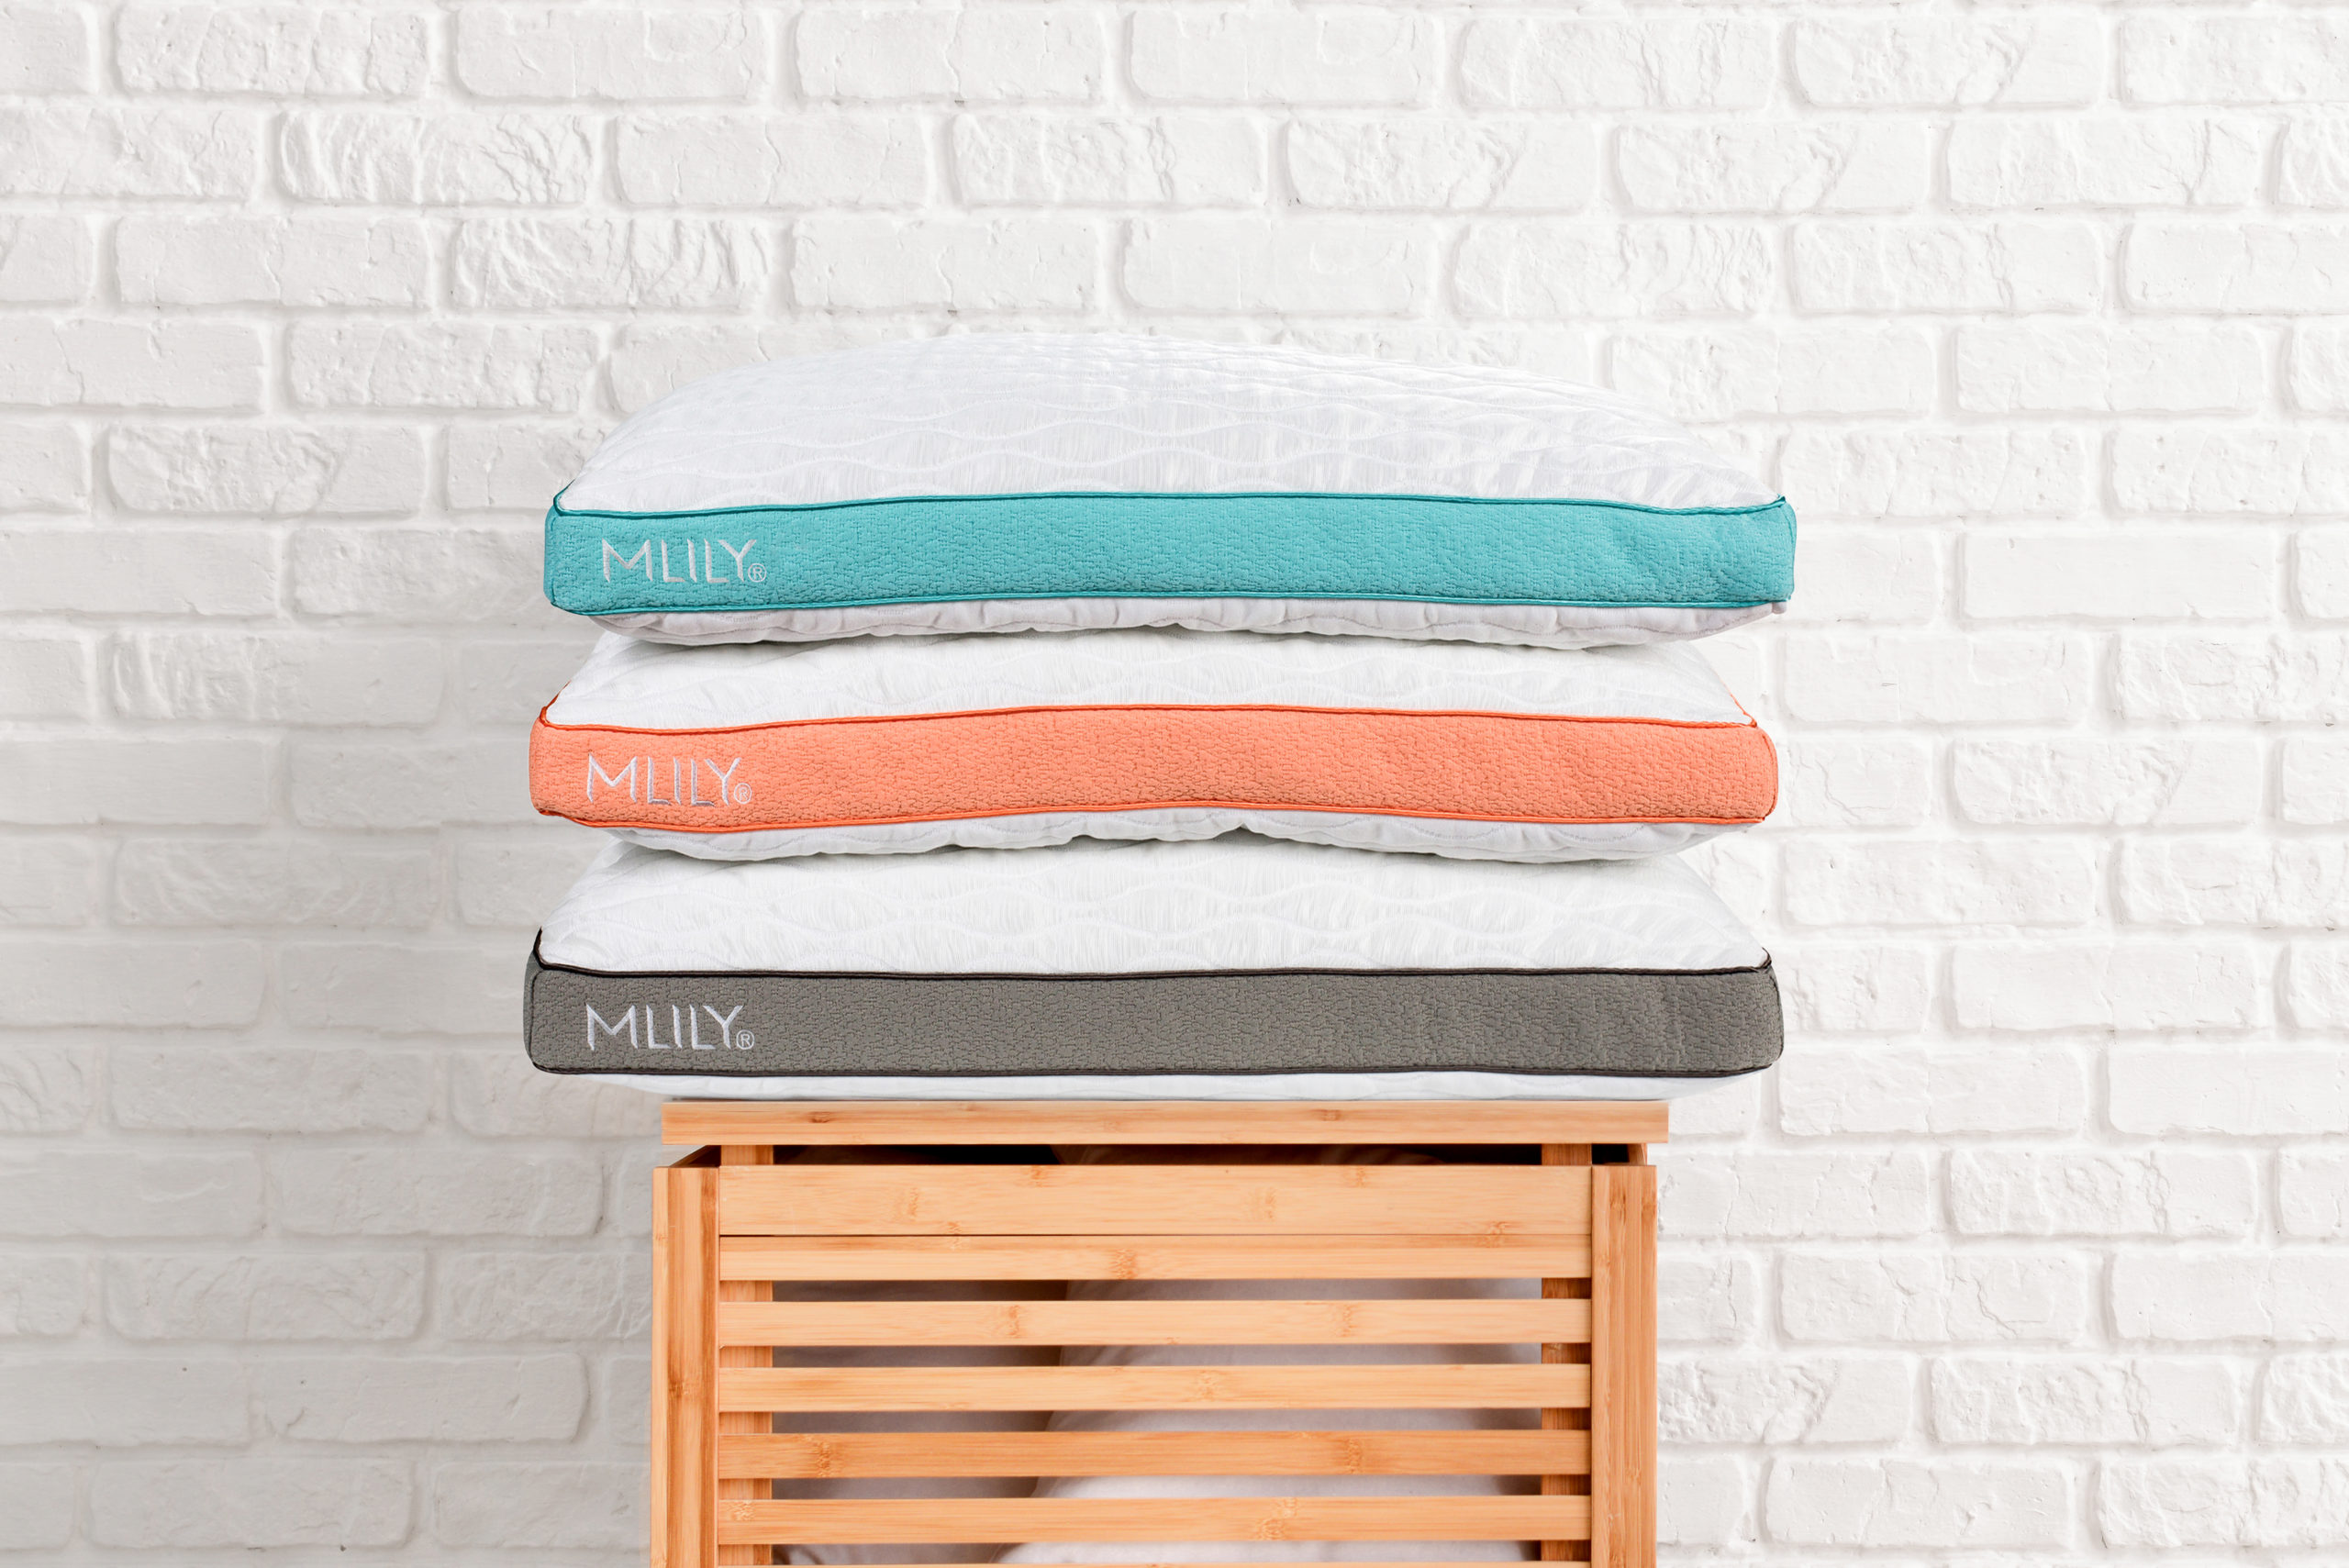 Three white MLILY pillows banded in aqua, coral, and grey stacked on a wooden slatted stool in front of white brick wall.